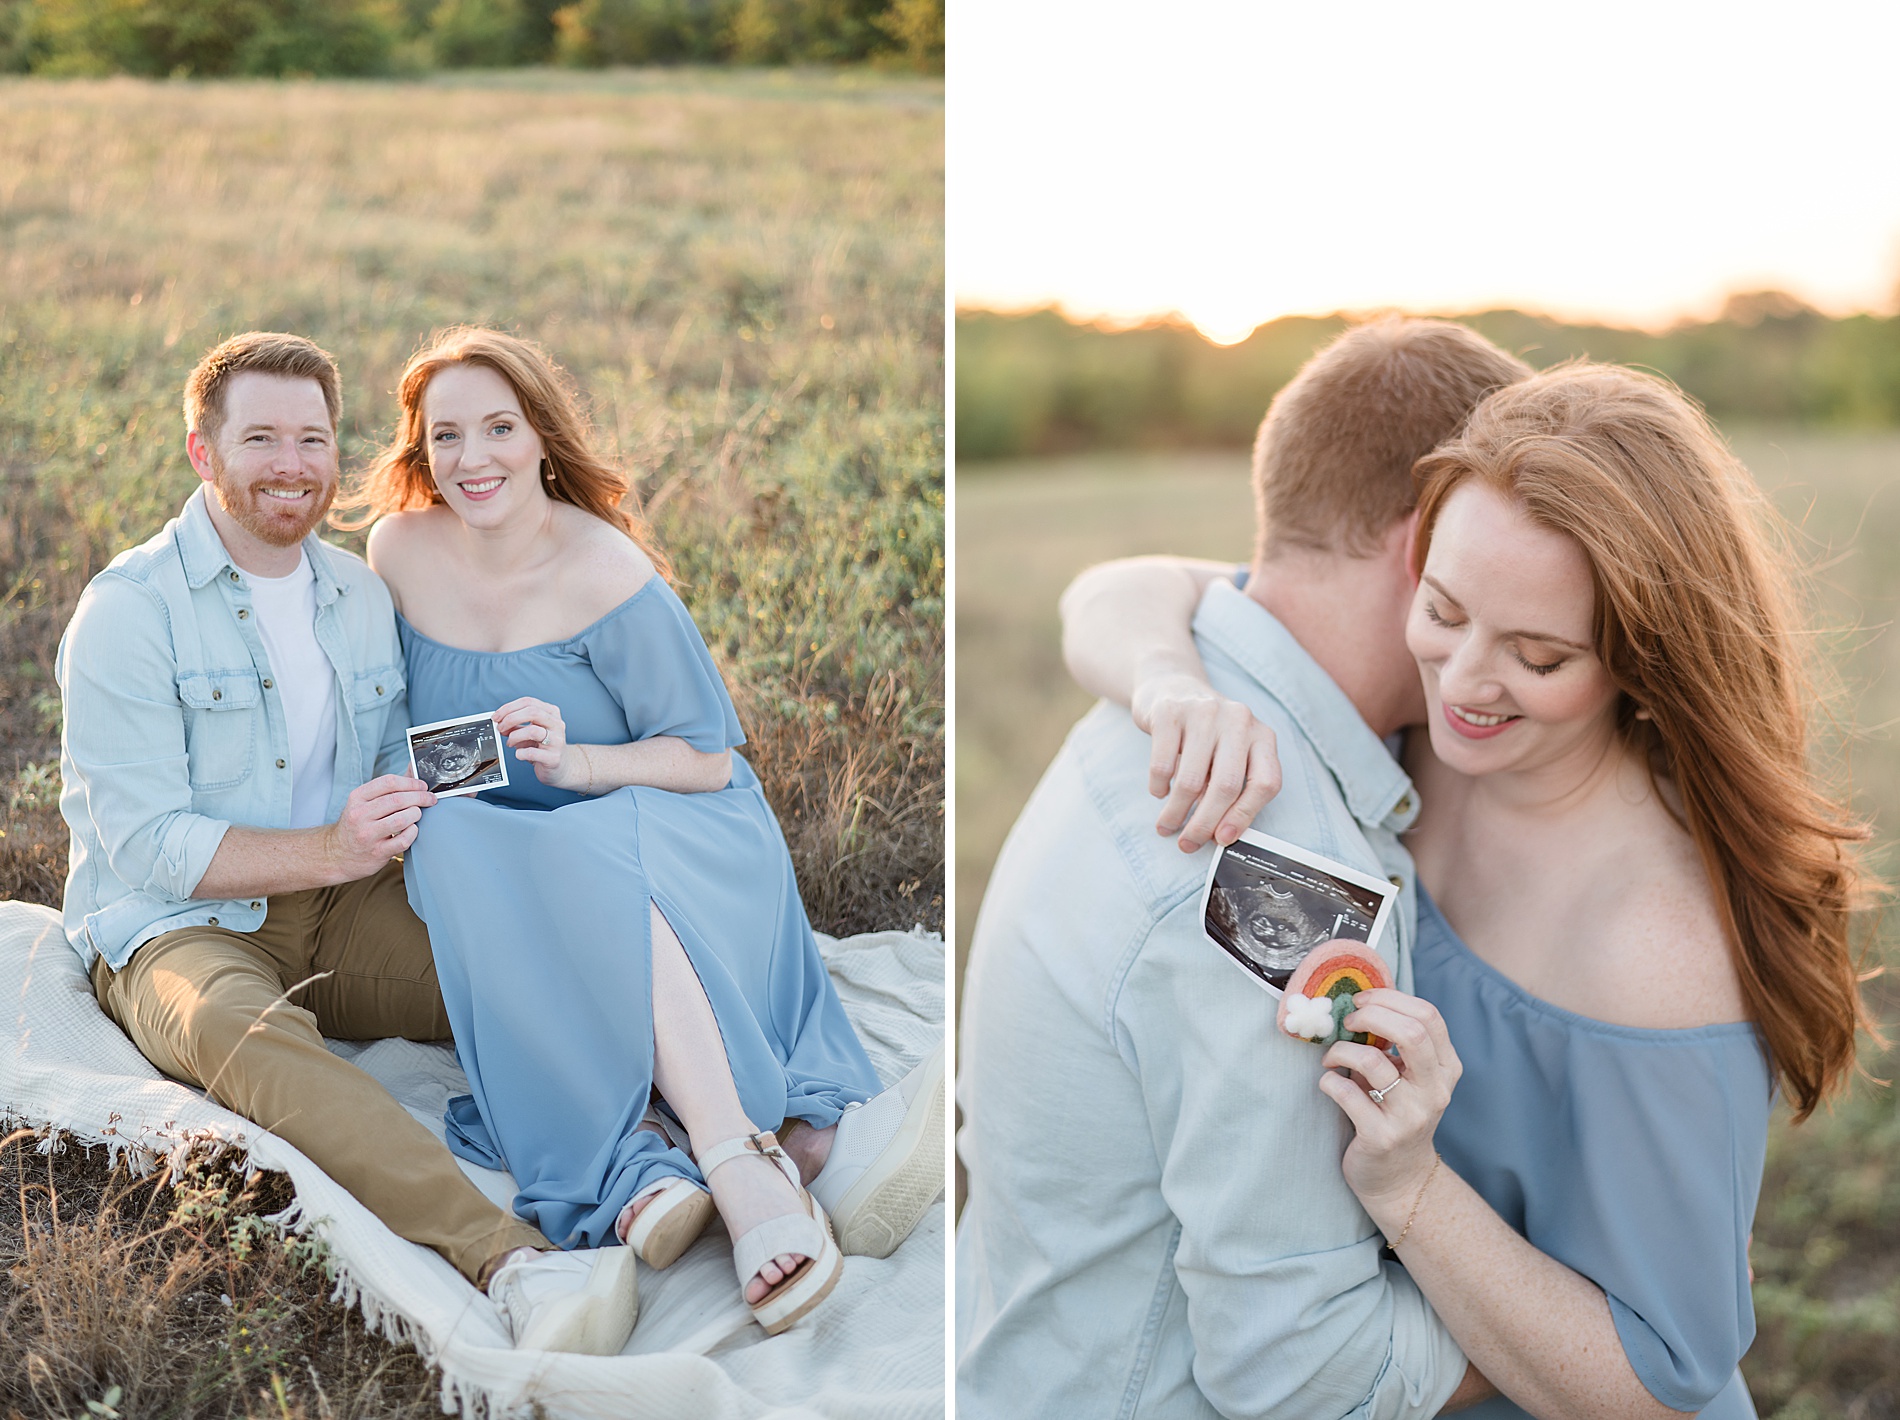 family holding ultrasound photos of their rainbow baby photographed by Lindsey Dutton Photography, a Dallas maternity photographer
